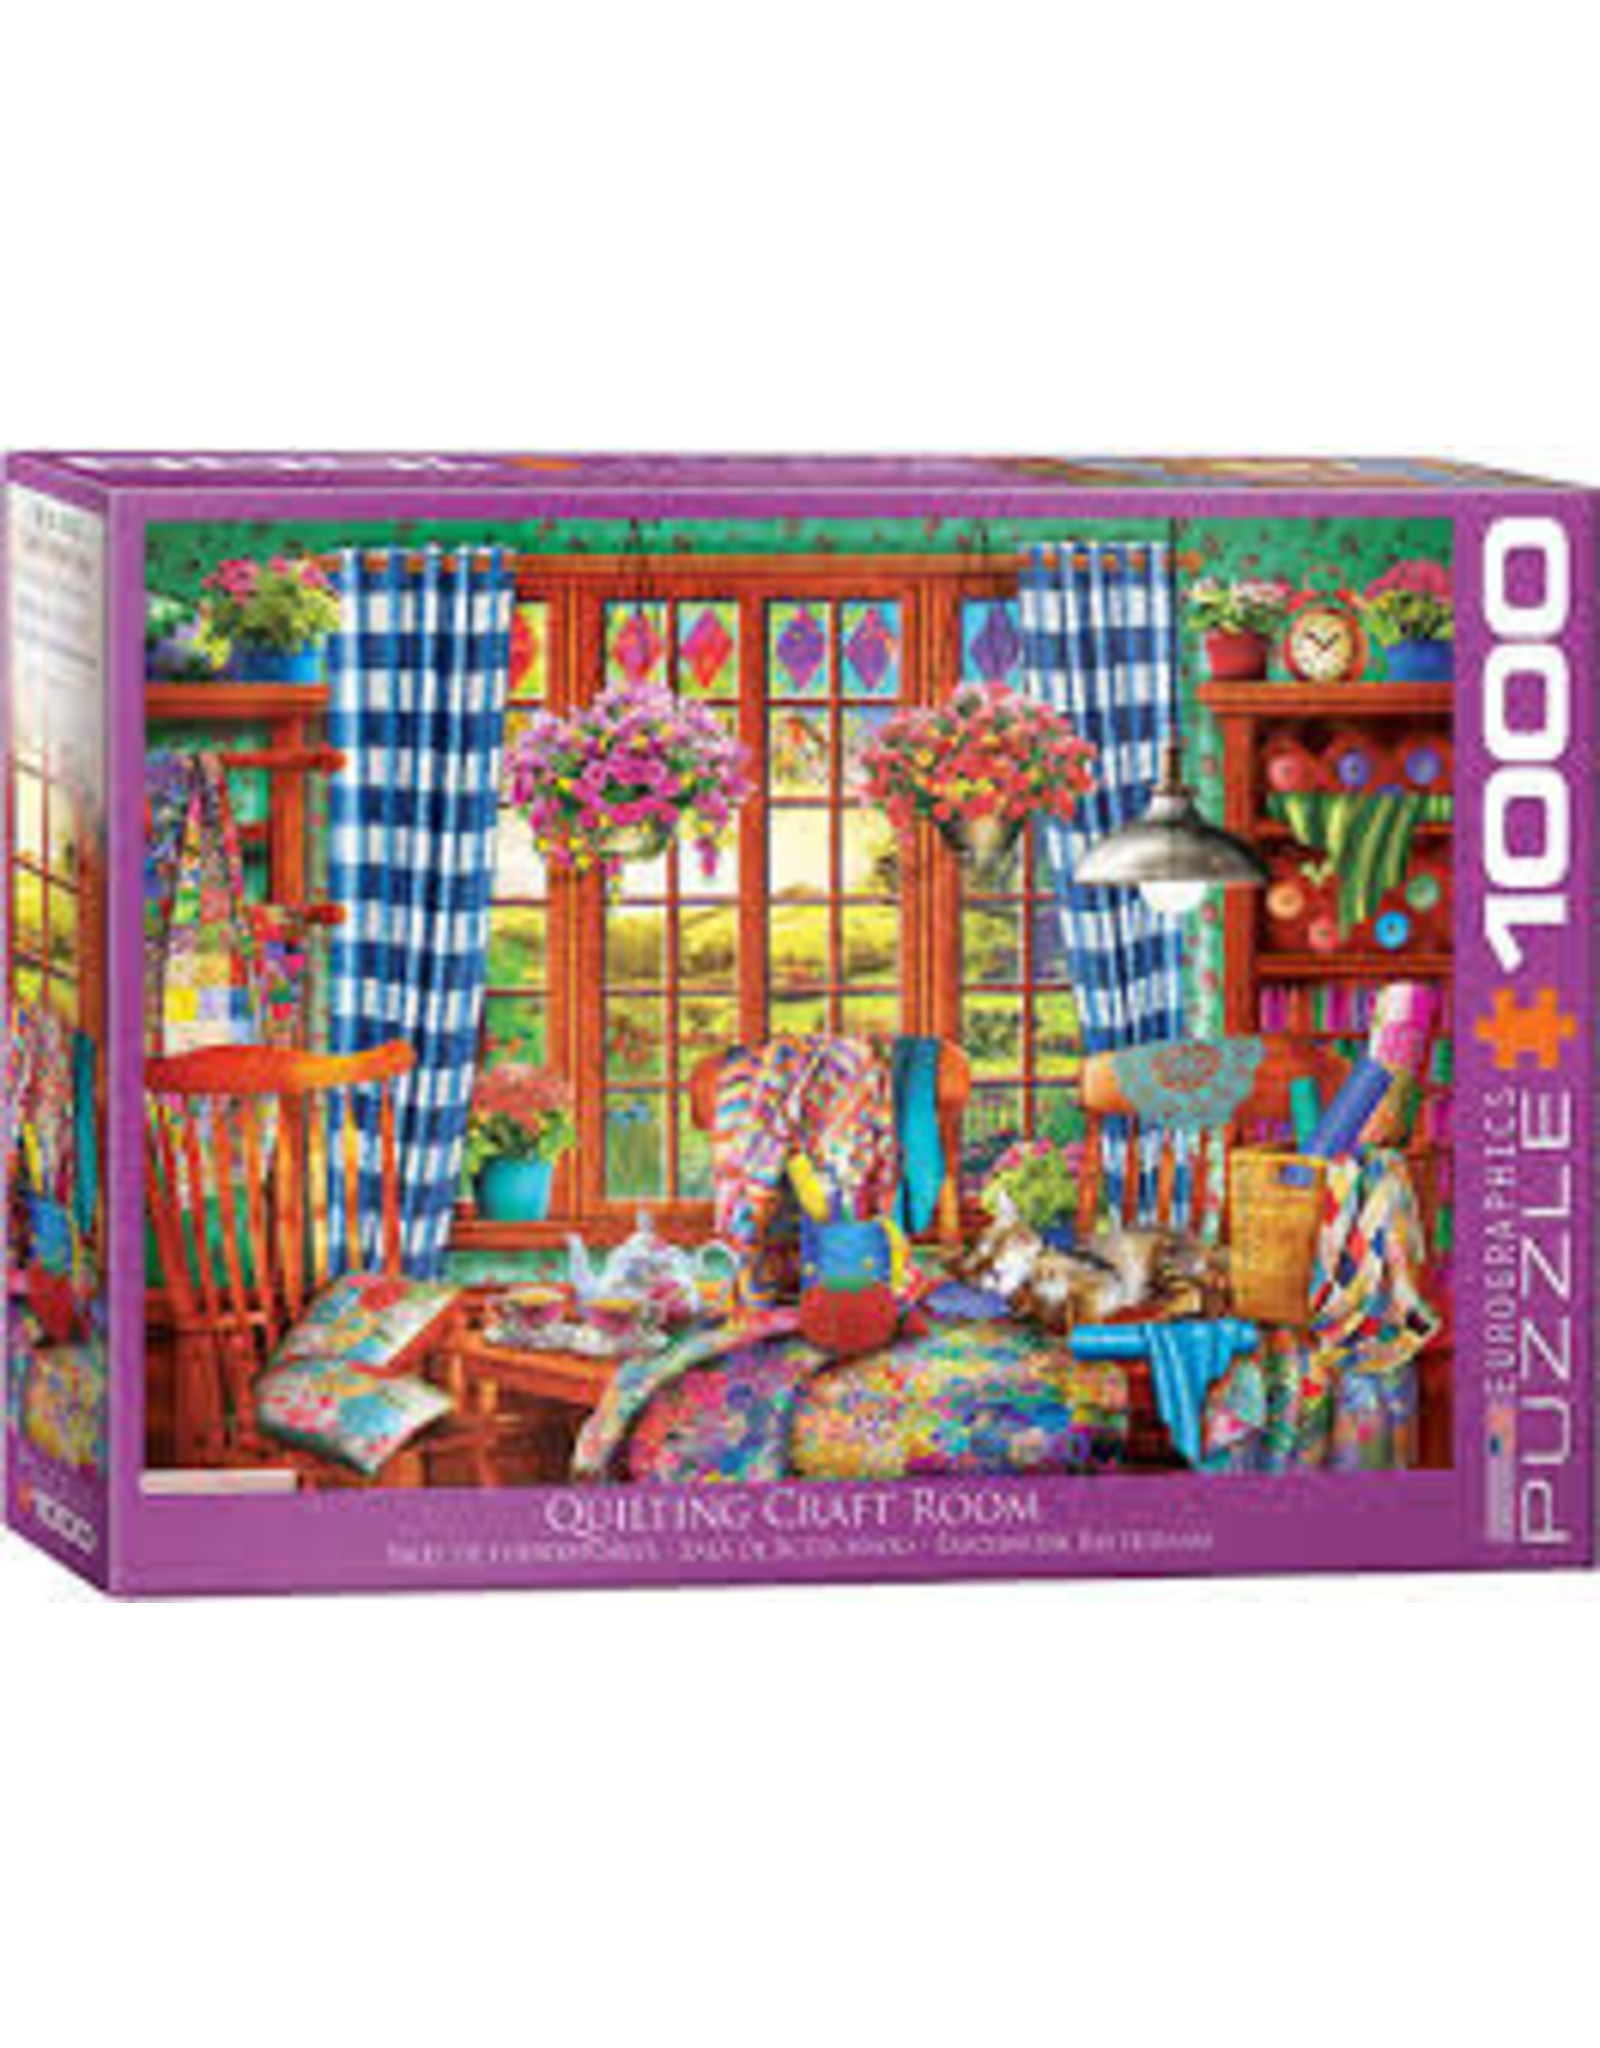 Eurographics Quilting Craft Room 1000 pc